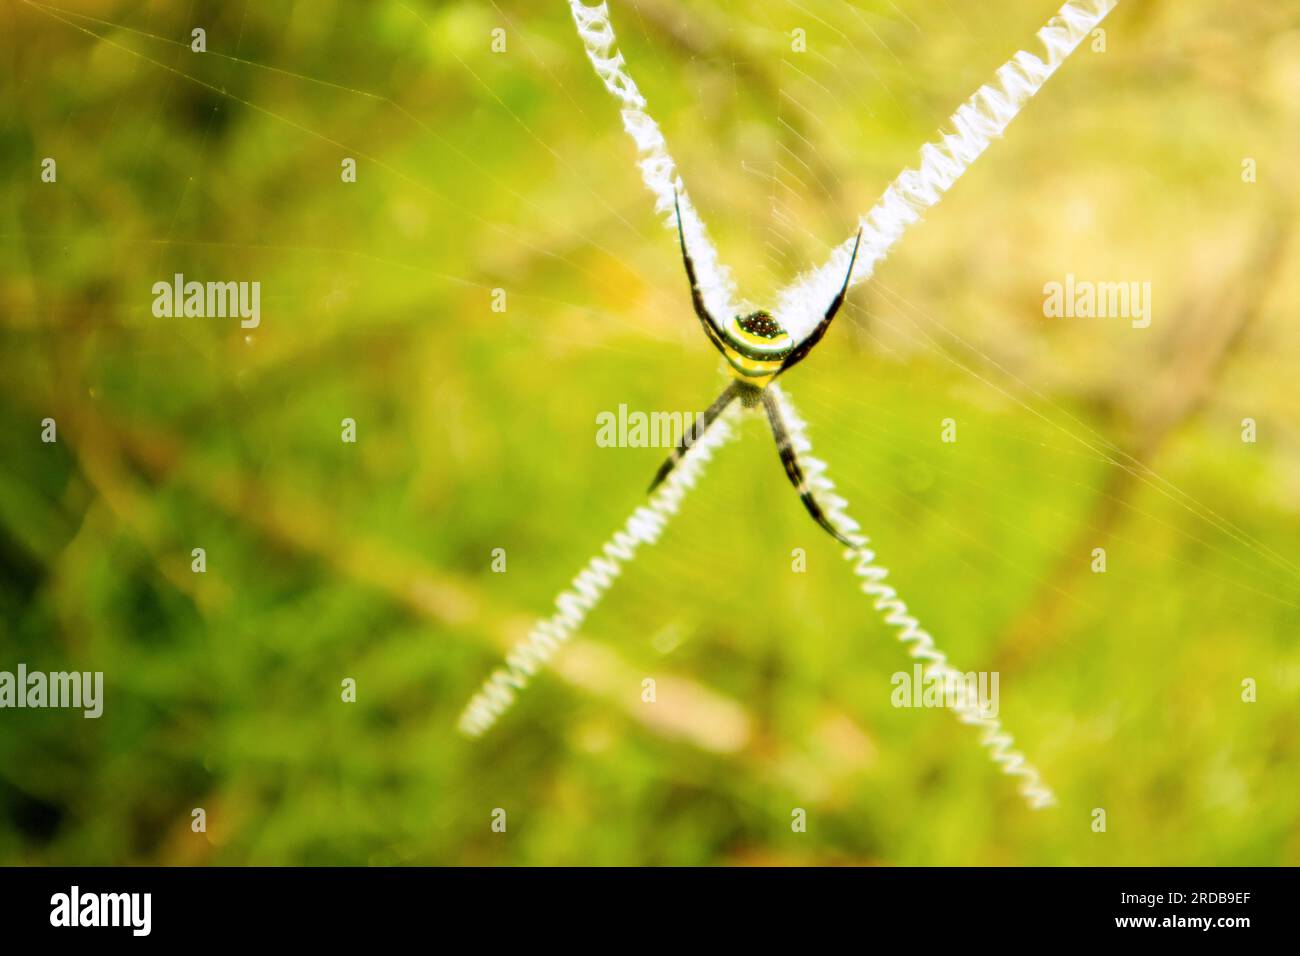 Spider on a spider web in the forest. Macro photography of nature. Stock Photo